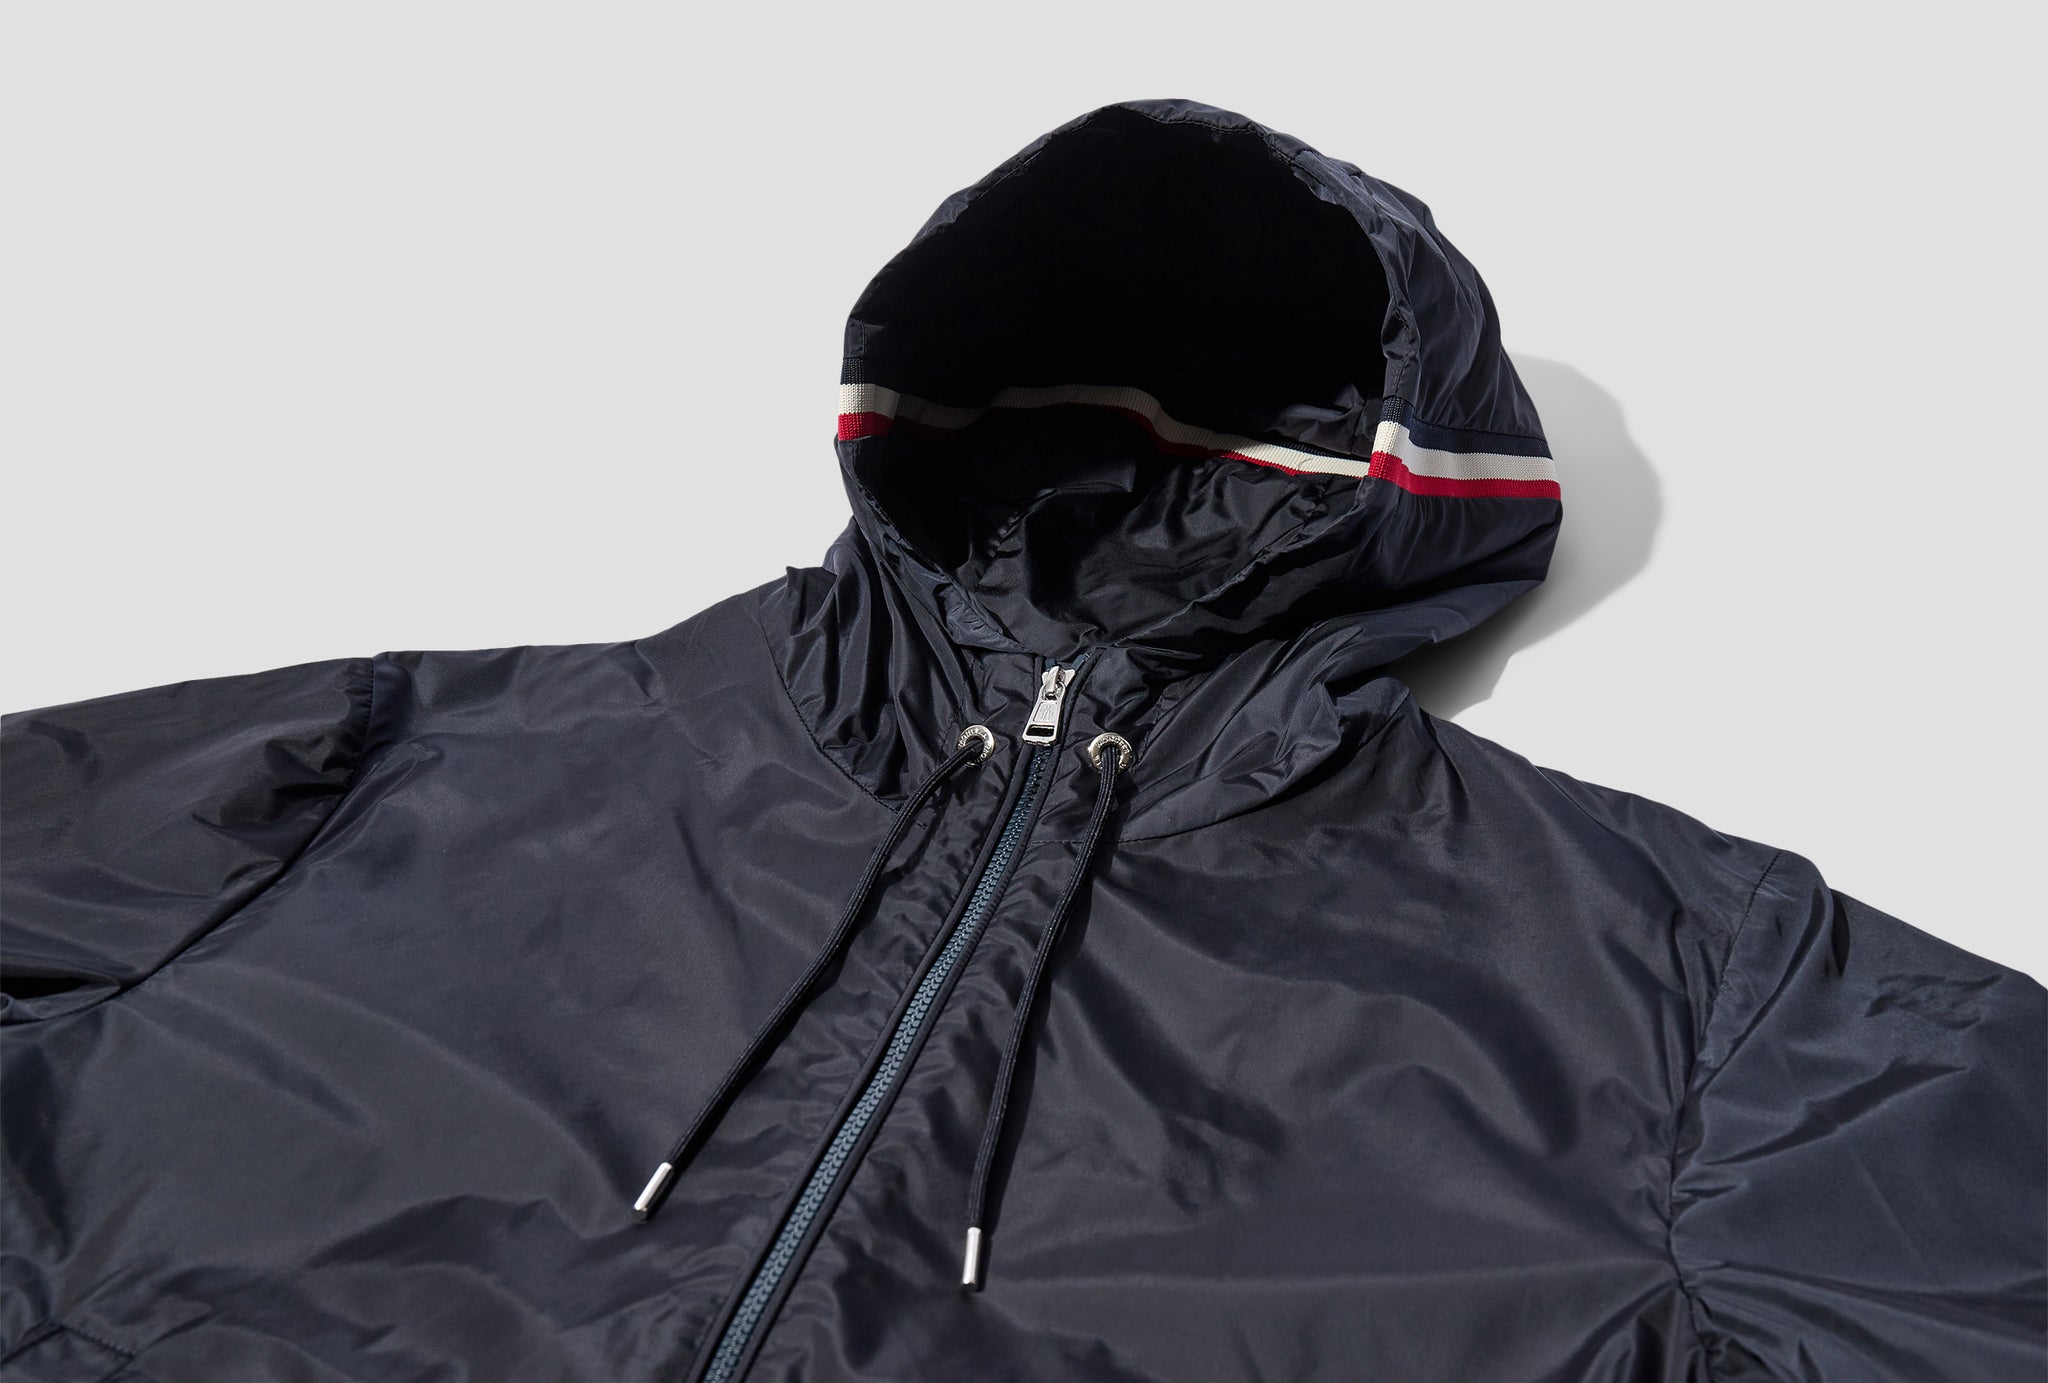 GRIMPEURS HOODED JACKET H1 091 1A000 77 54155 Navy